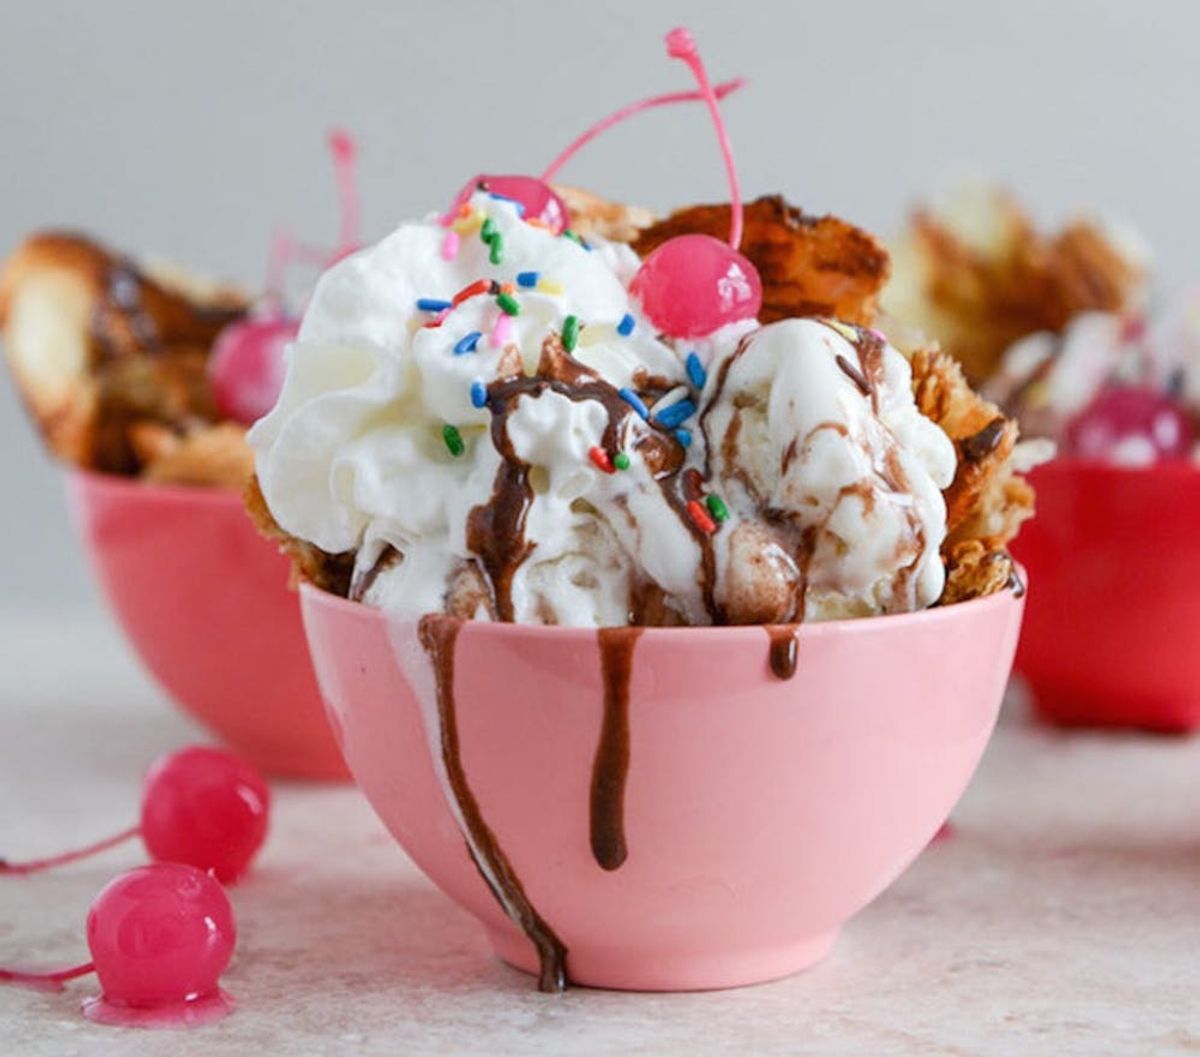 Ice Cream Sundaes in a pink bowl with sprinkles